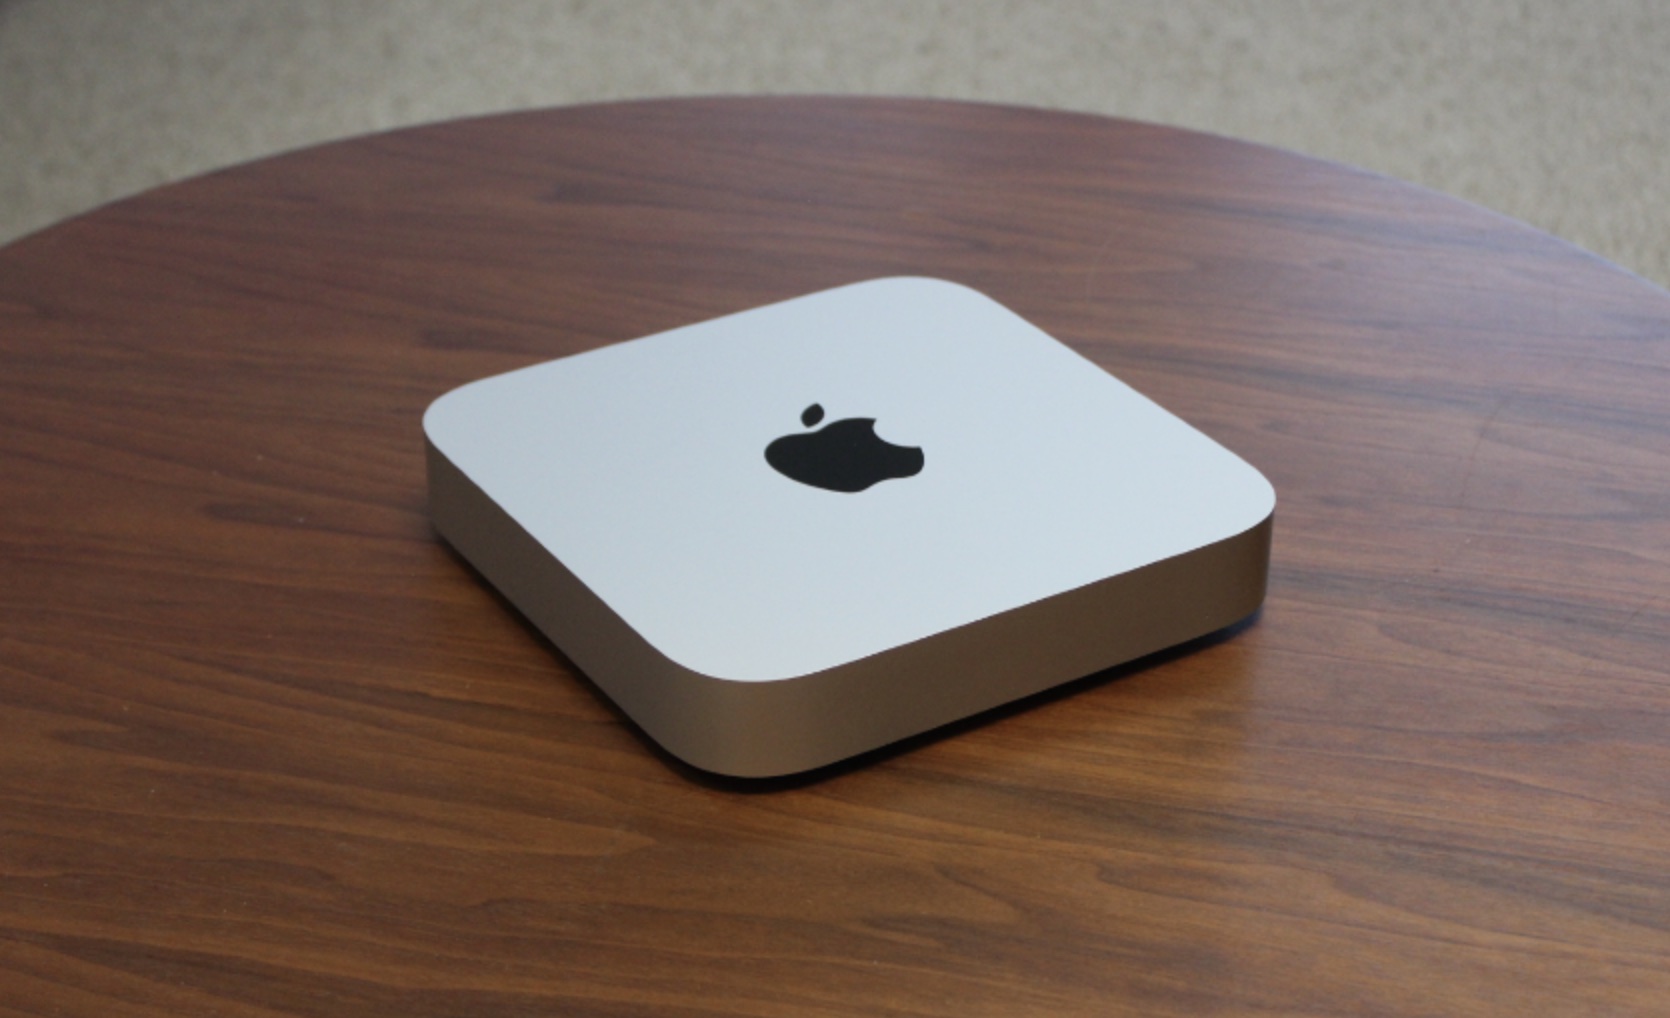 The Mac mini on a wooden table.